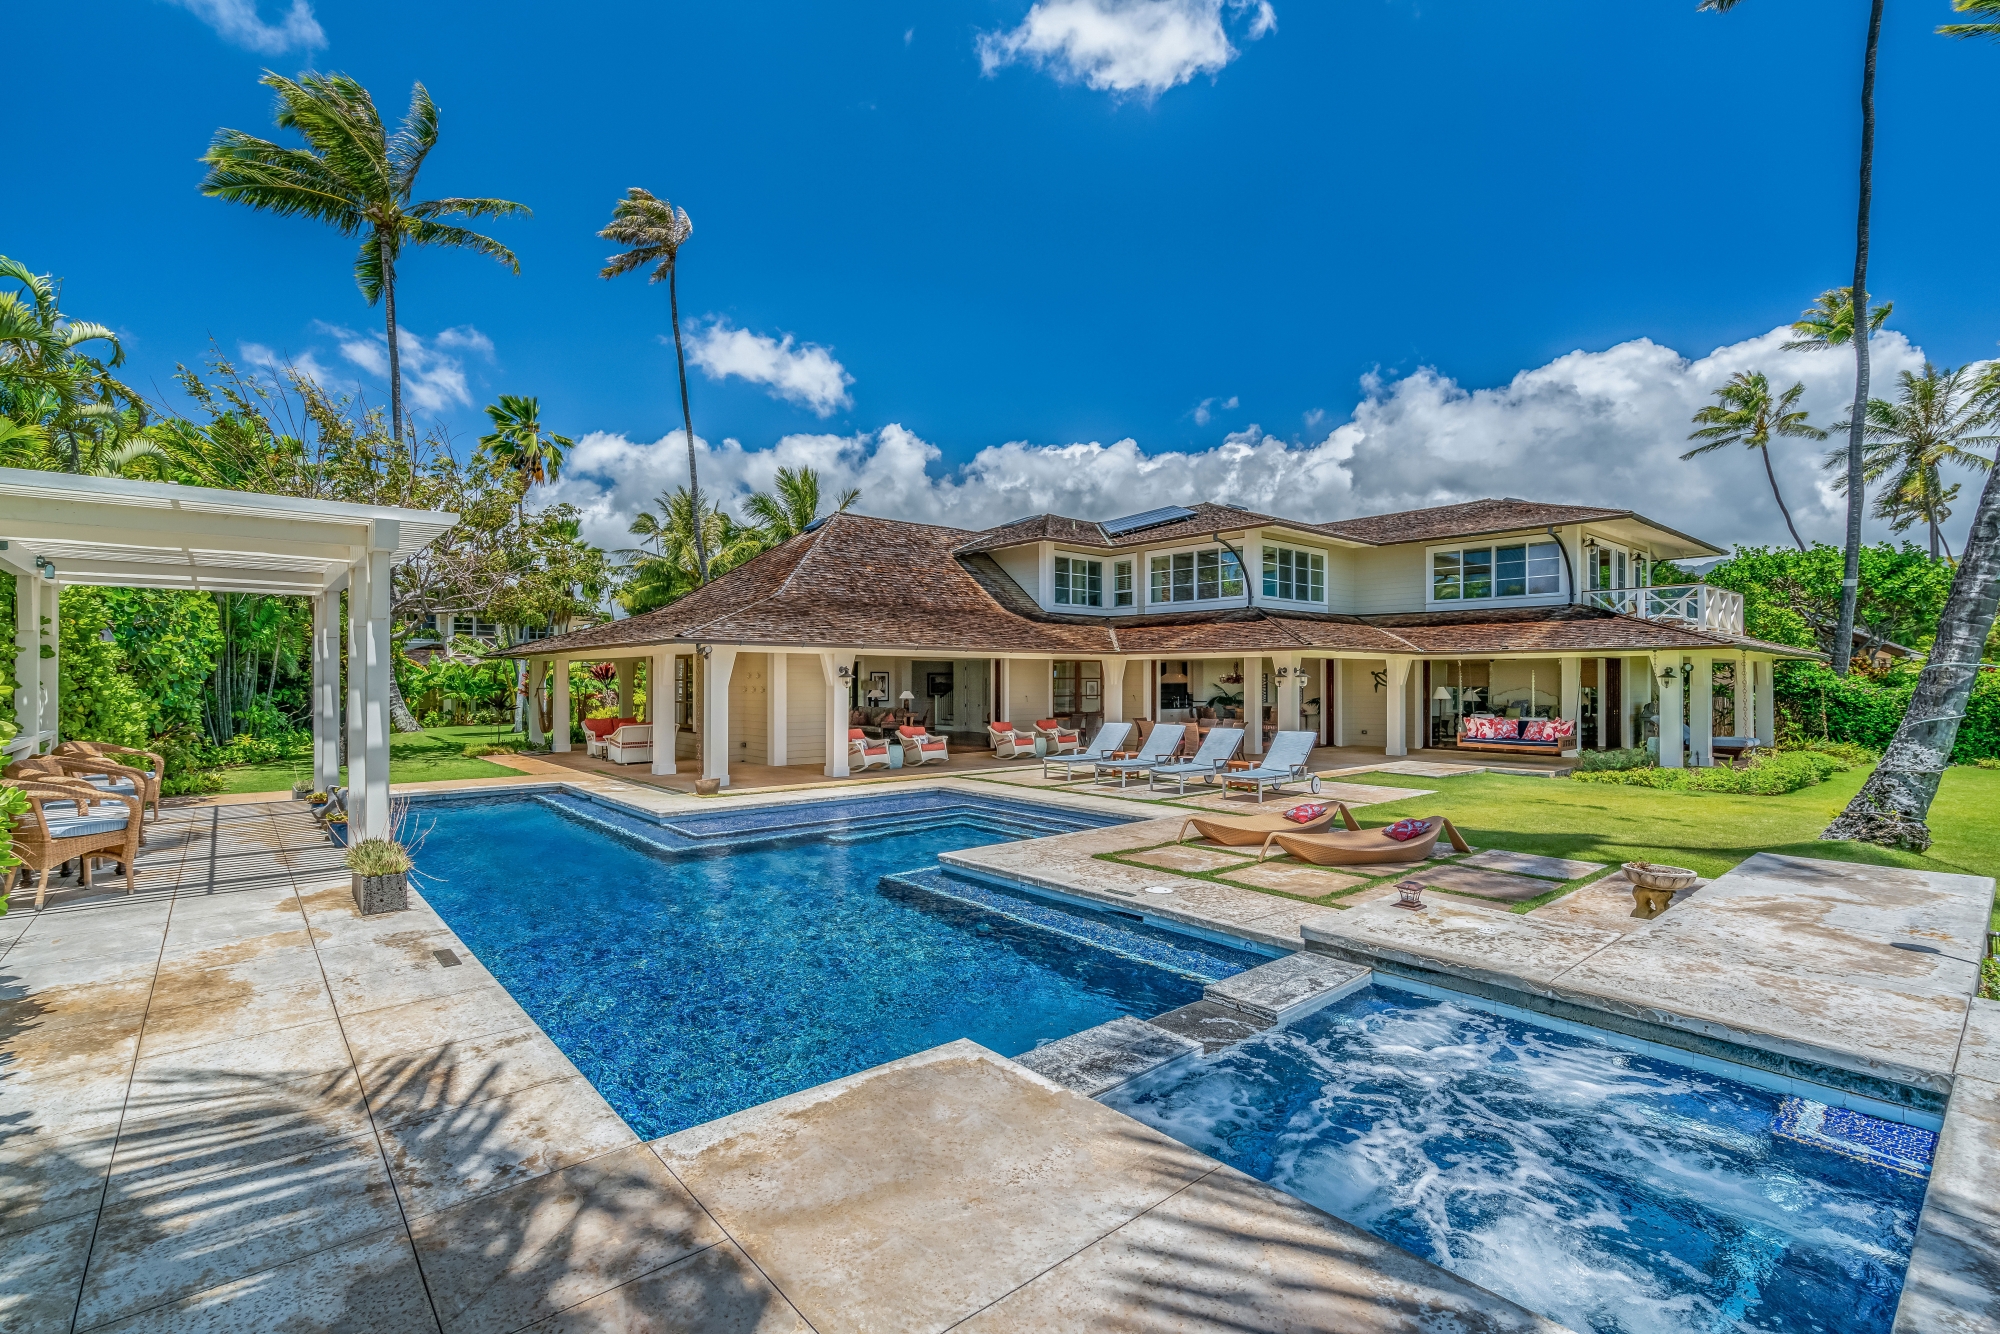 Coral Reef - Pool and hot tub - Oahu Vacation Home